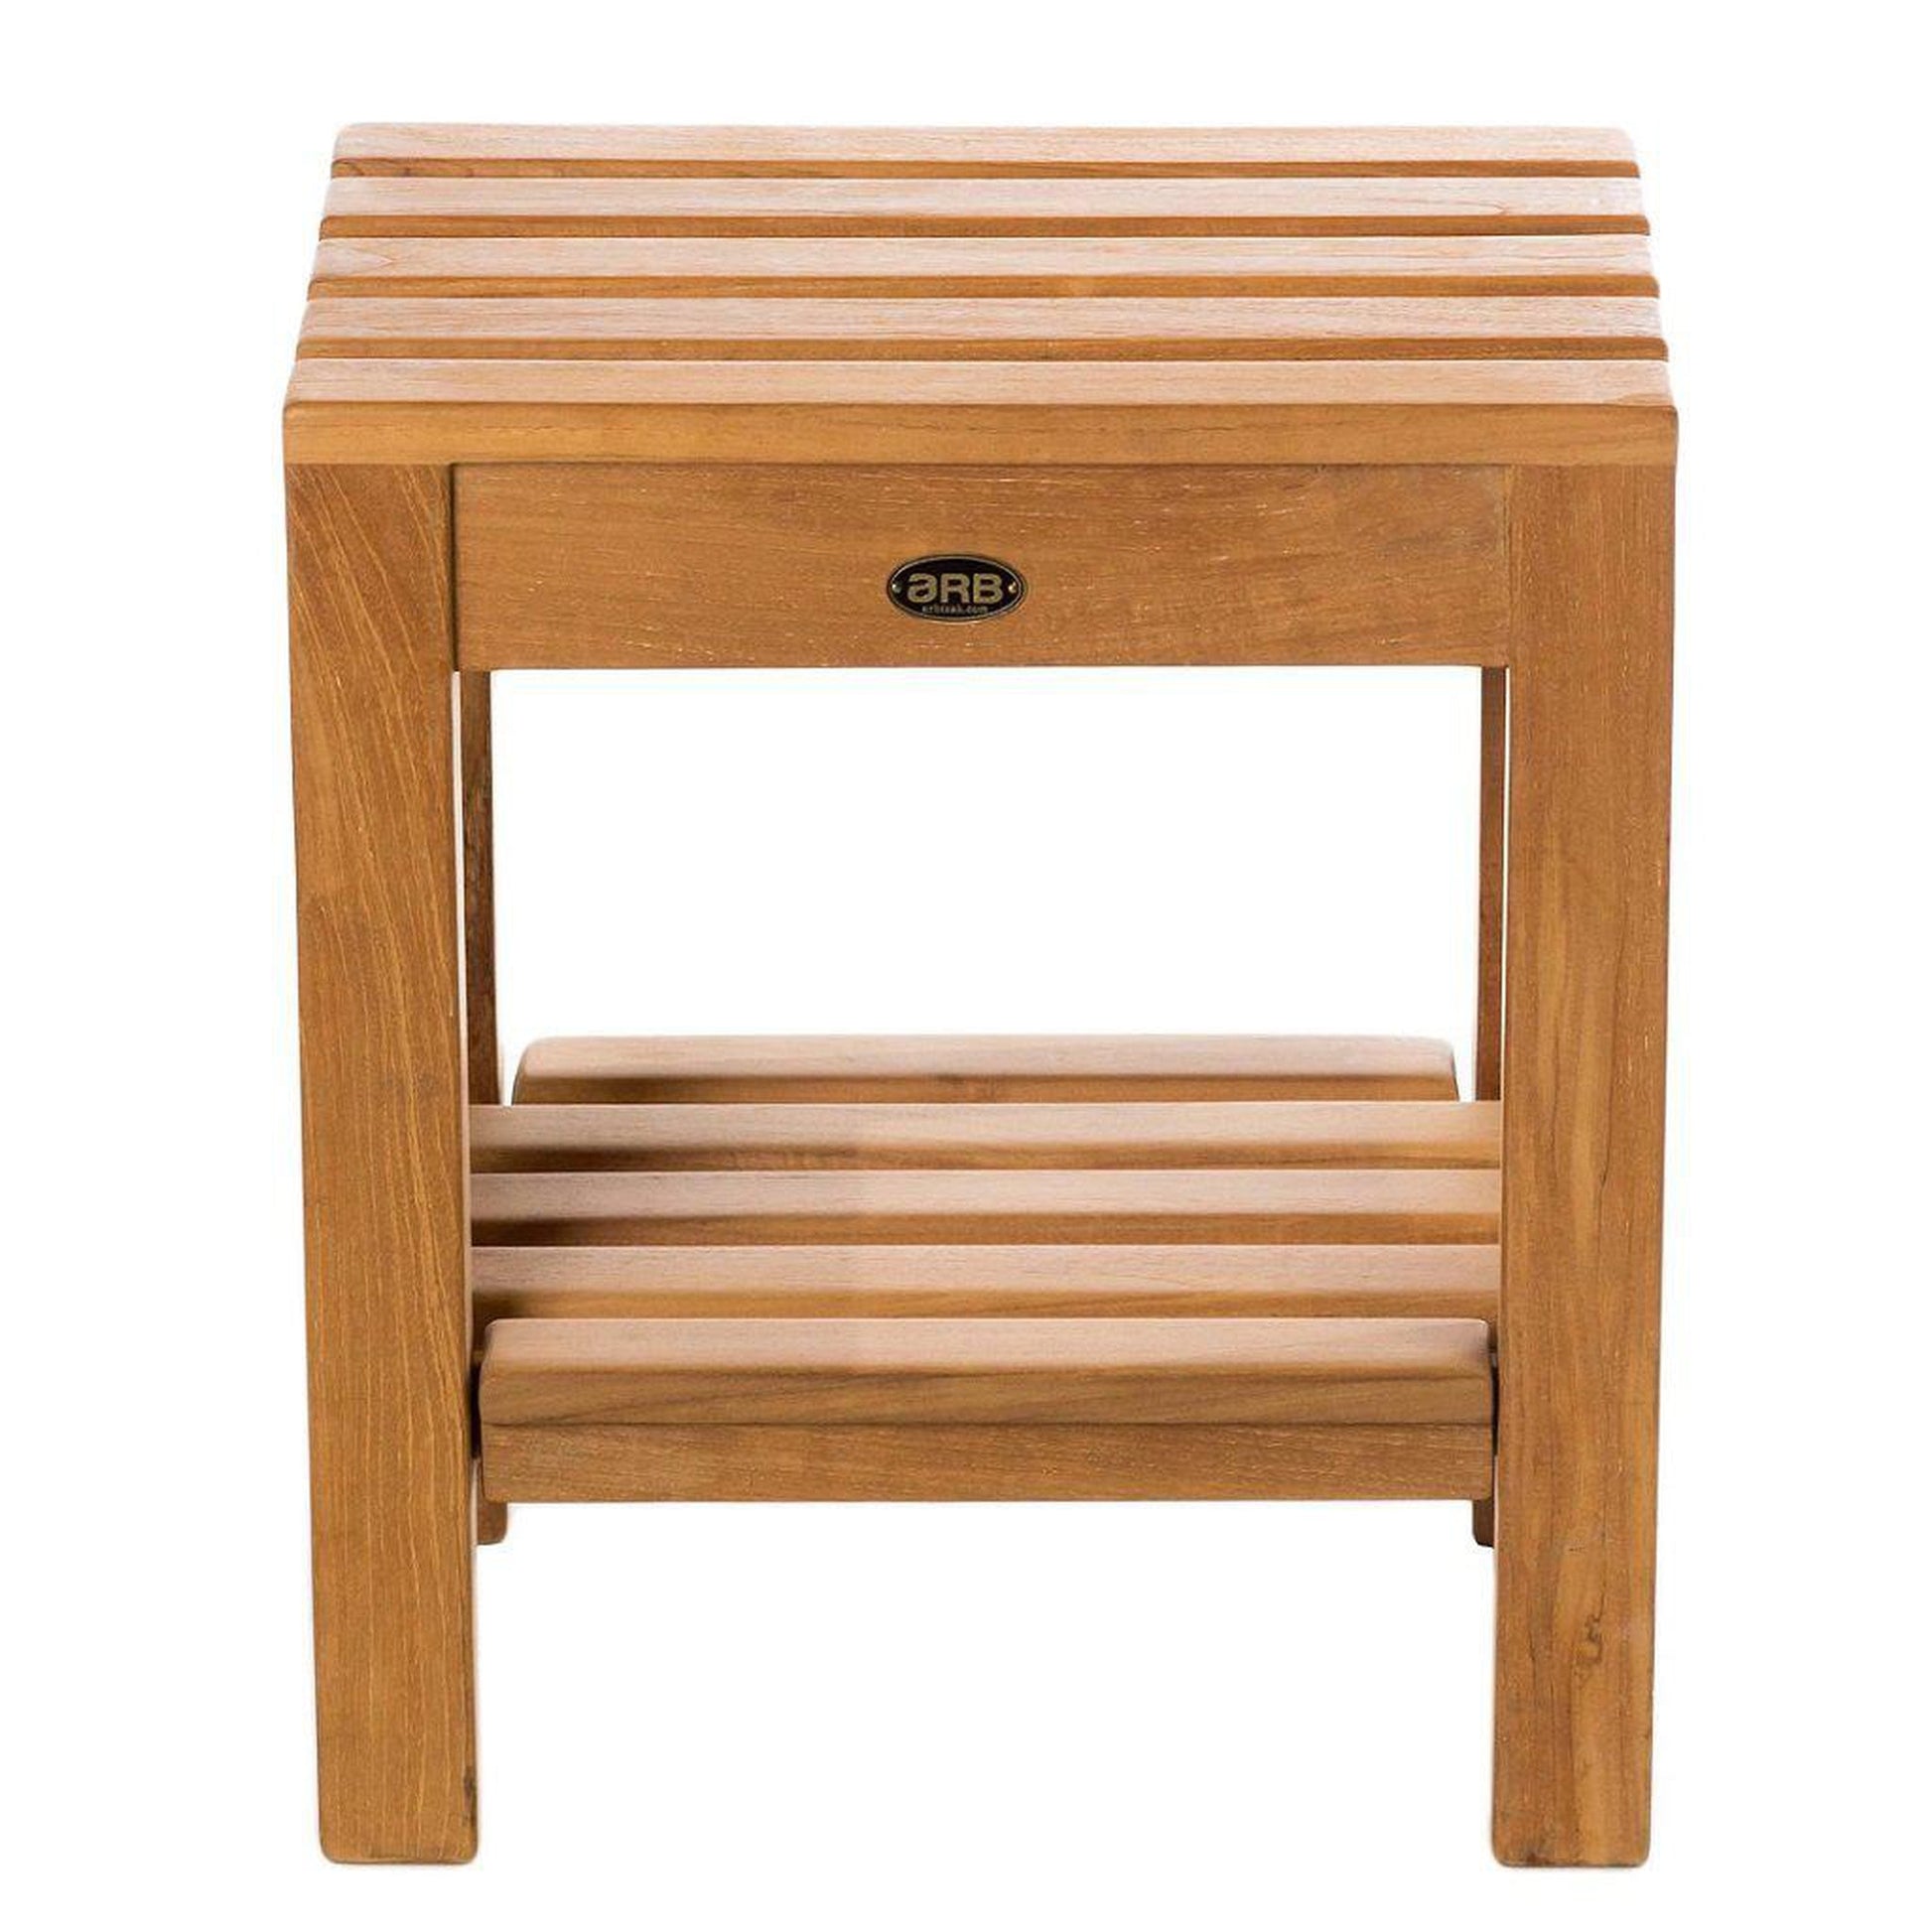 ARB Teak & Specialties Coach 16" Solid Teak Wood Shower Bench With Removable Shelf